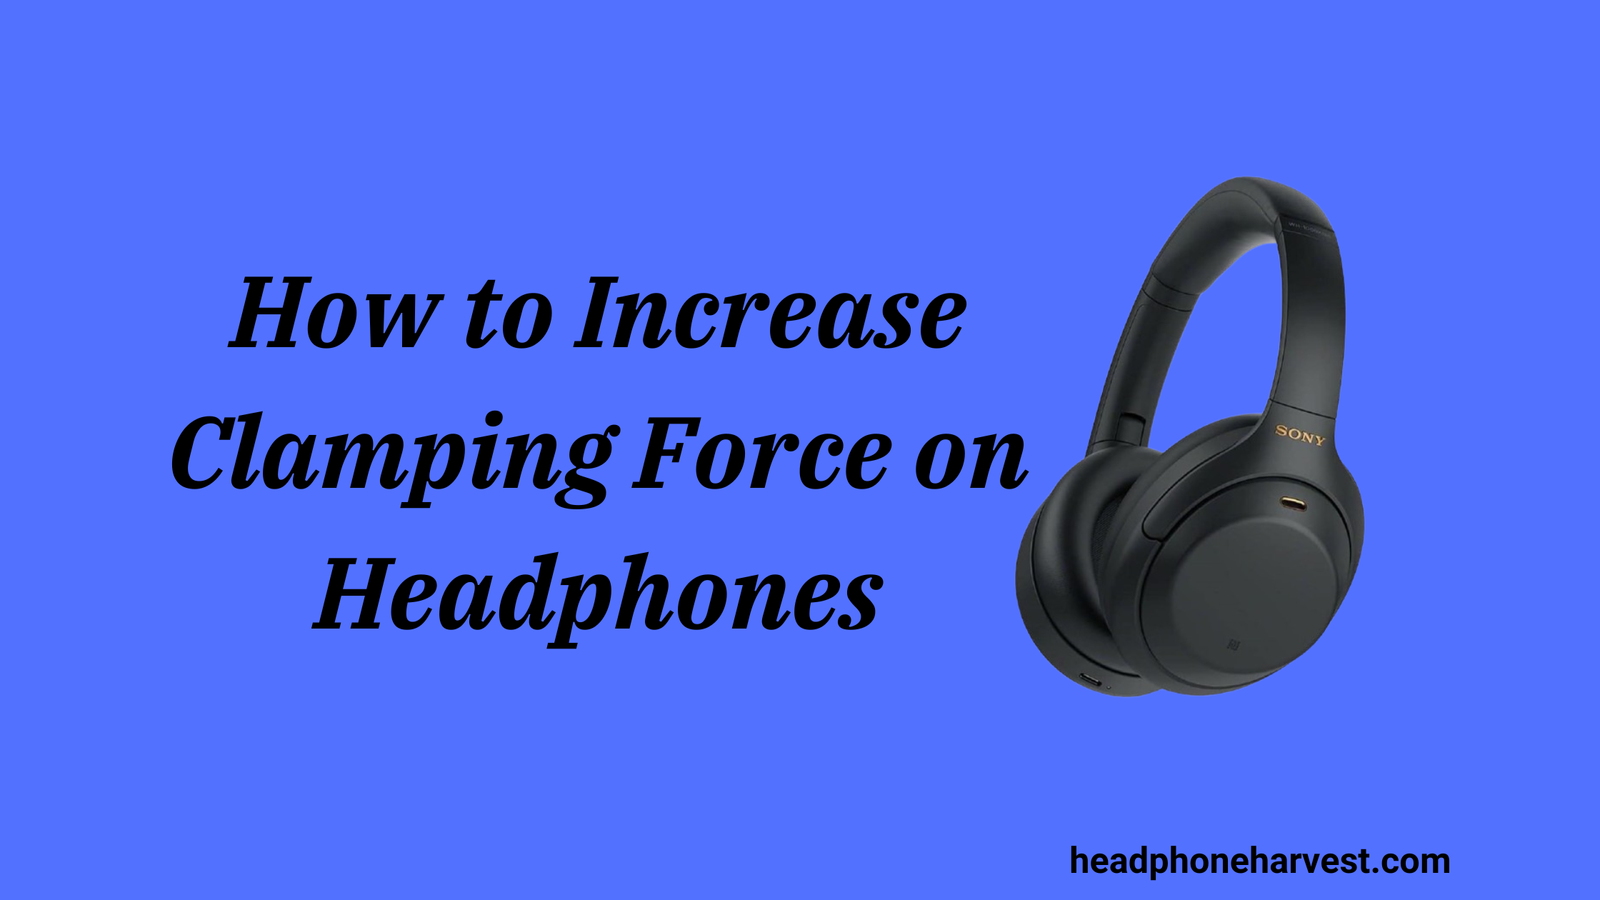 How to Increase Clamping Force on Headphones